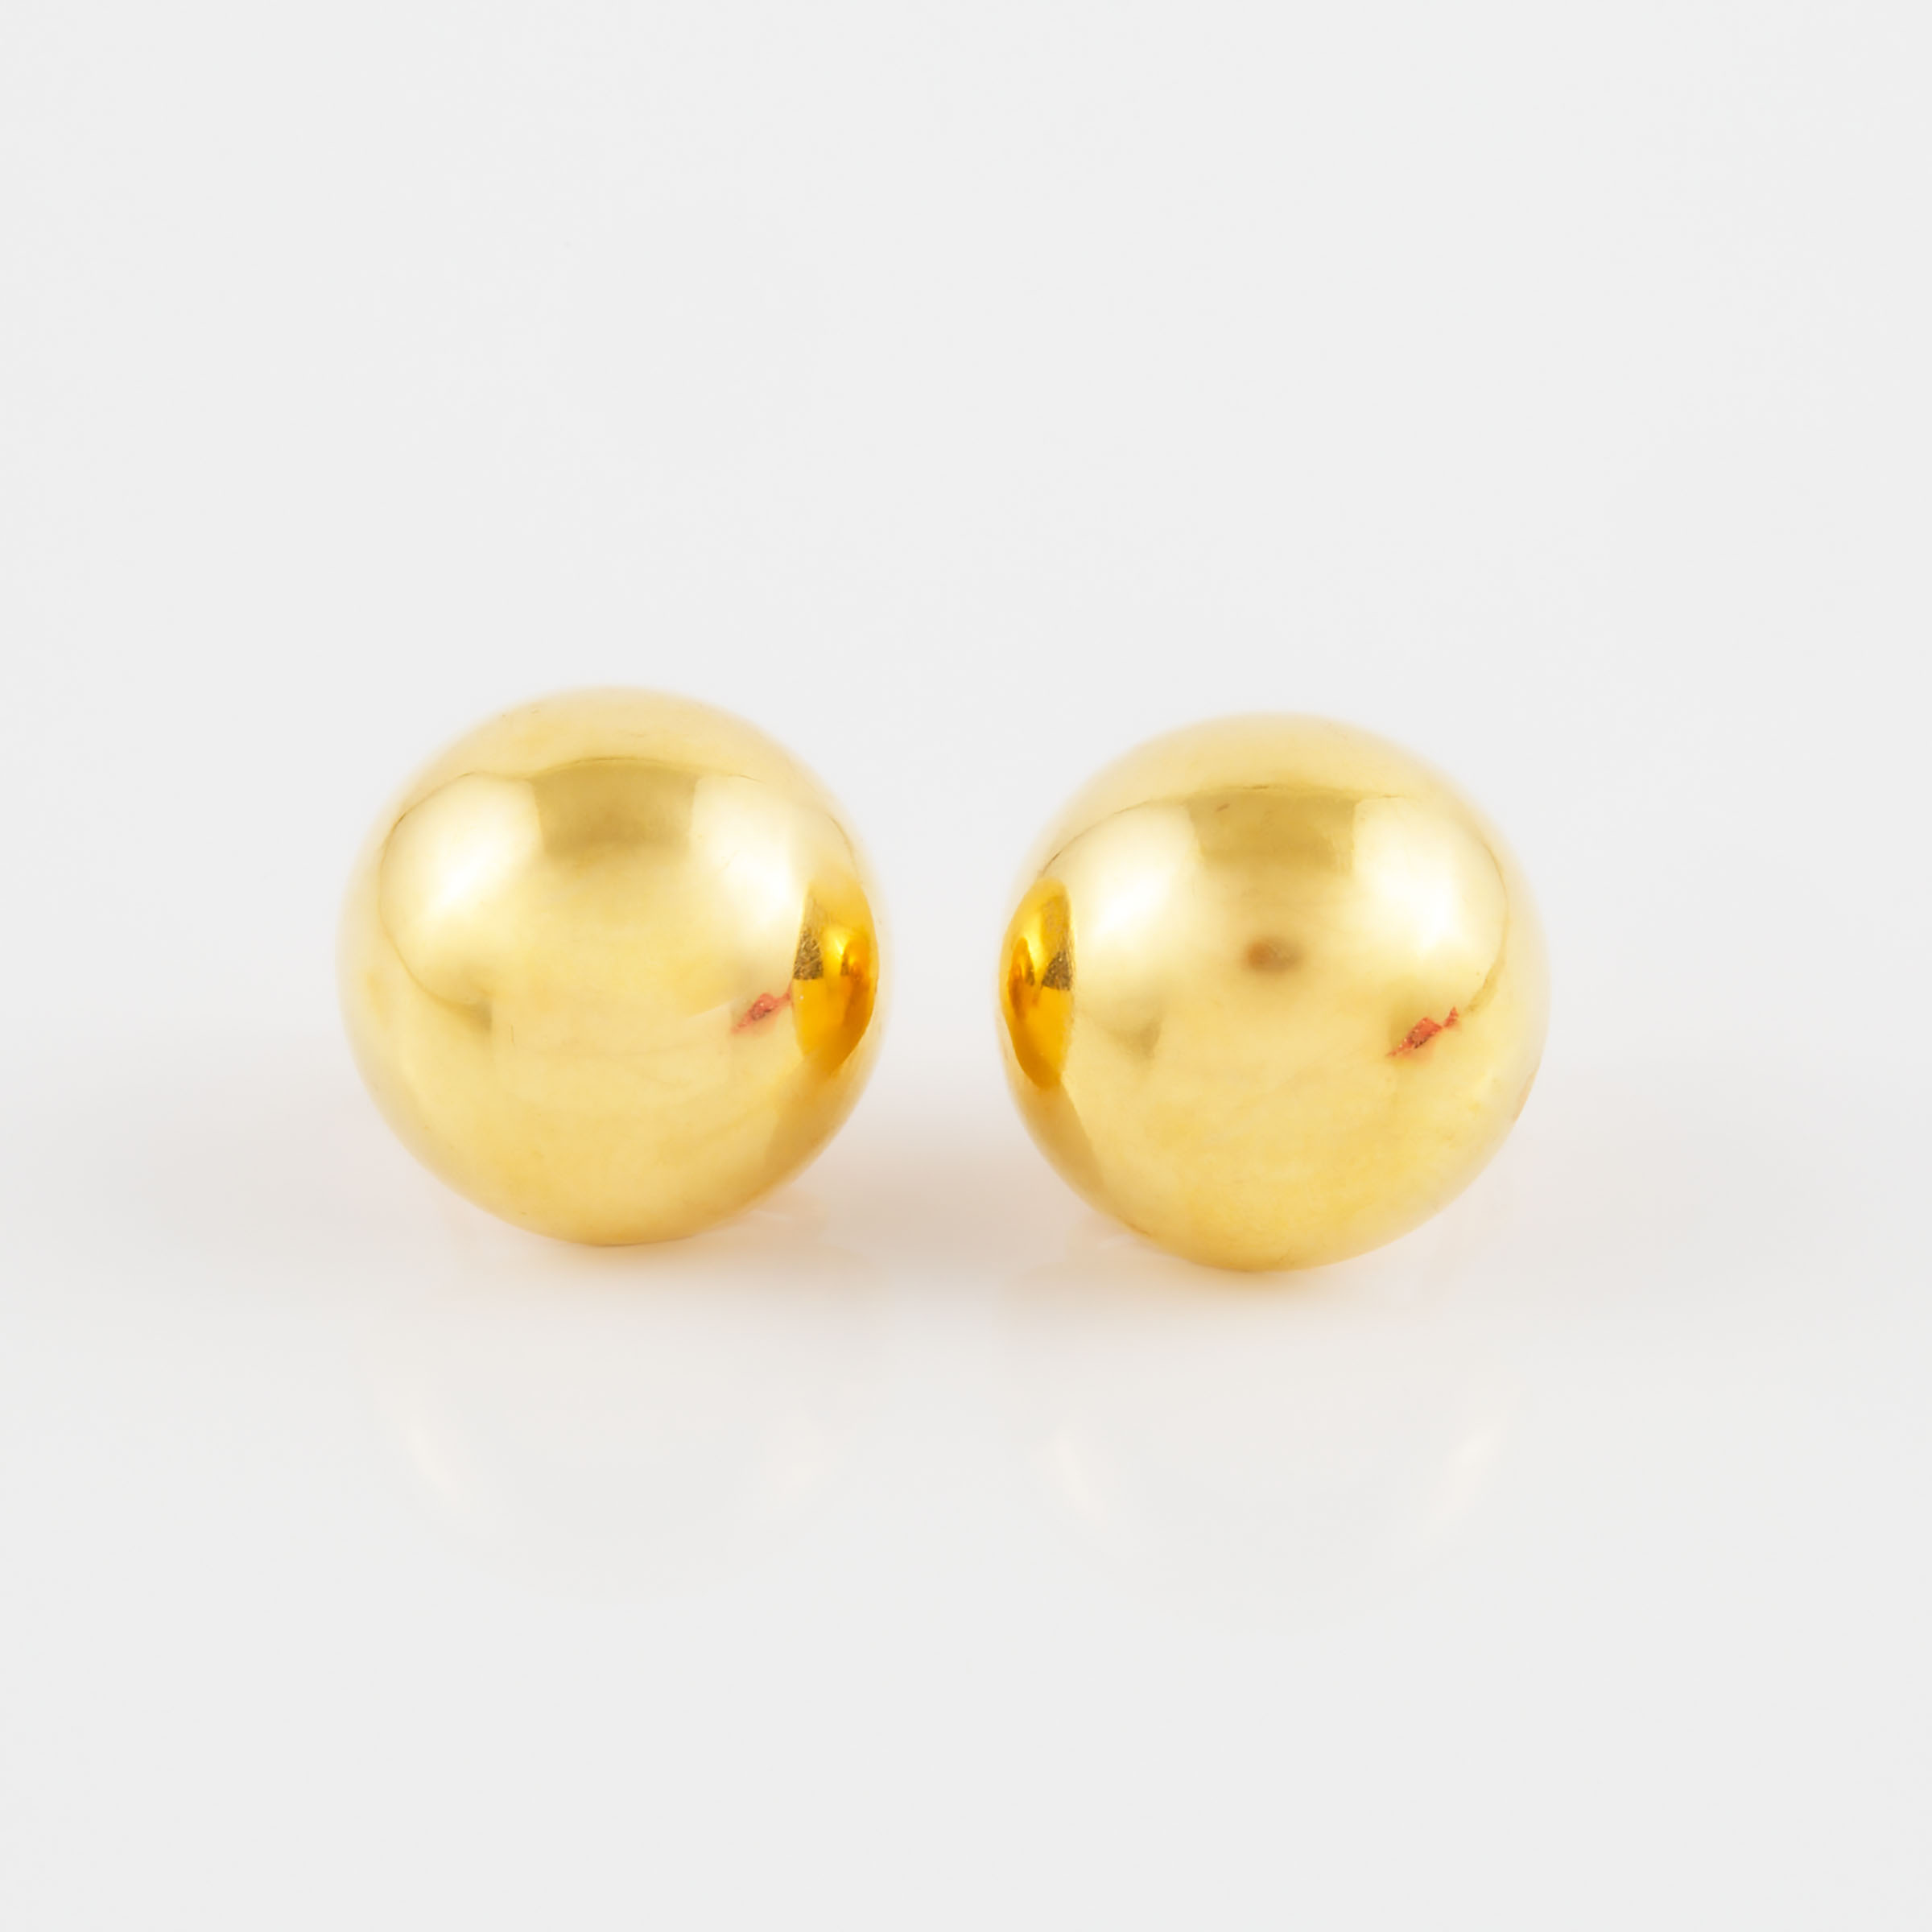 Pair Of 18k Yellow Gold Dome Earrings